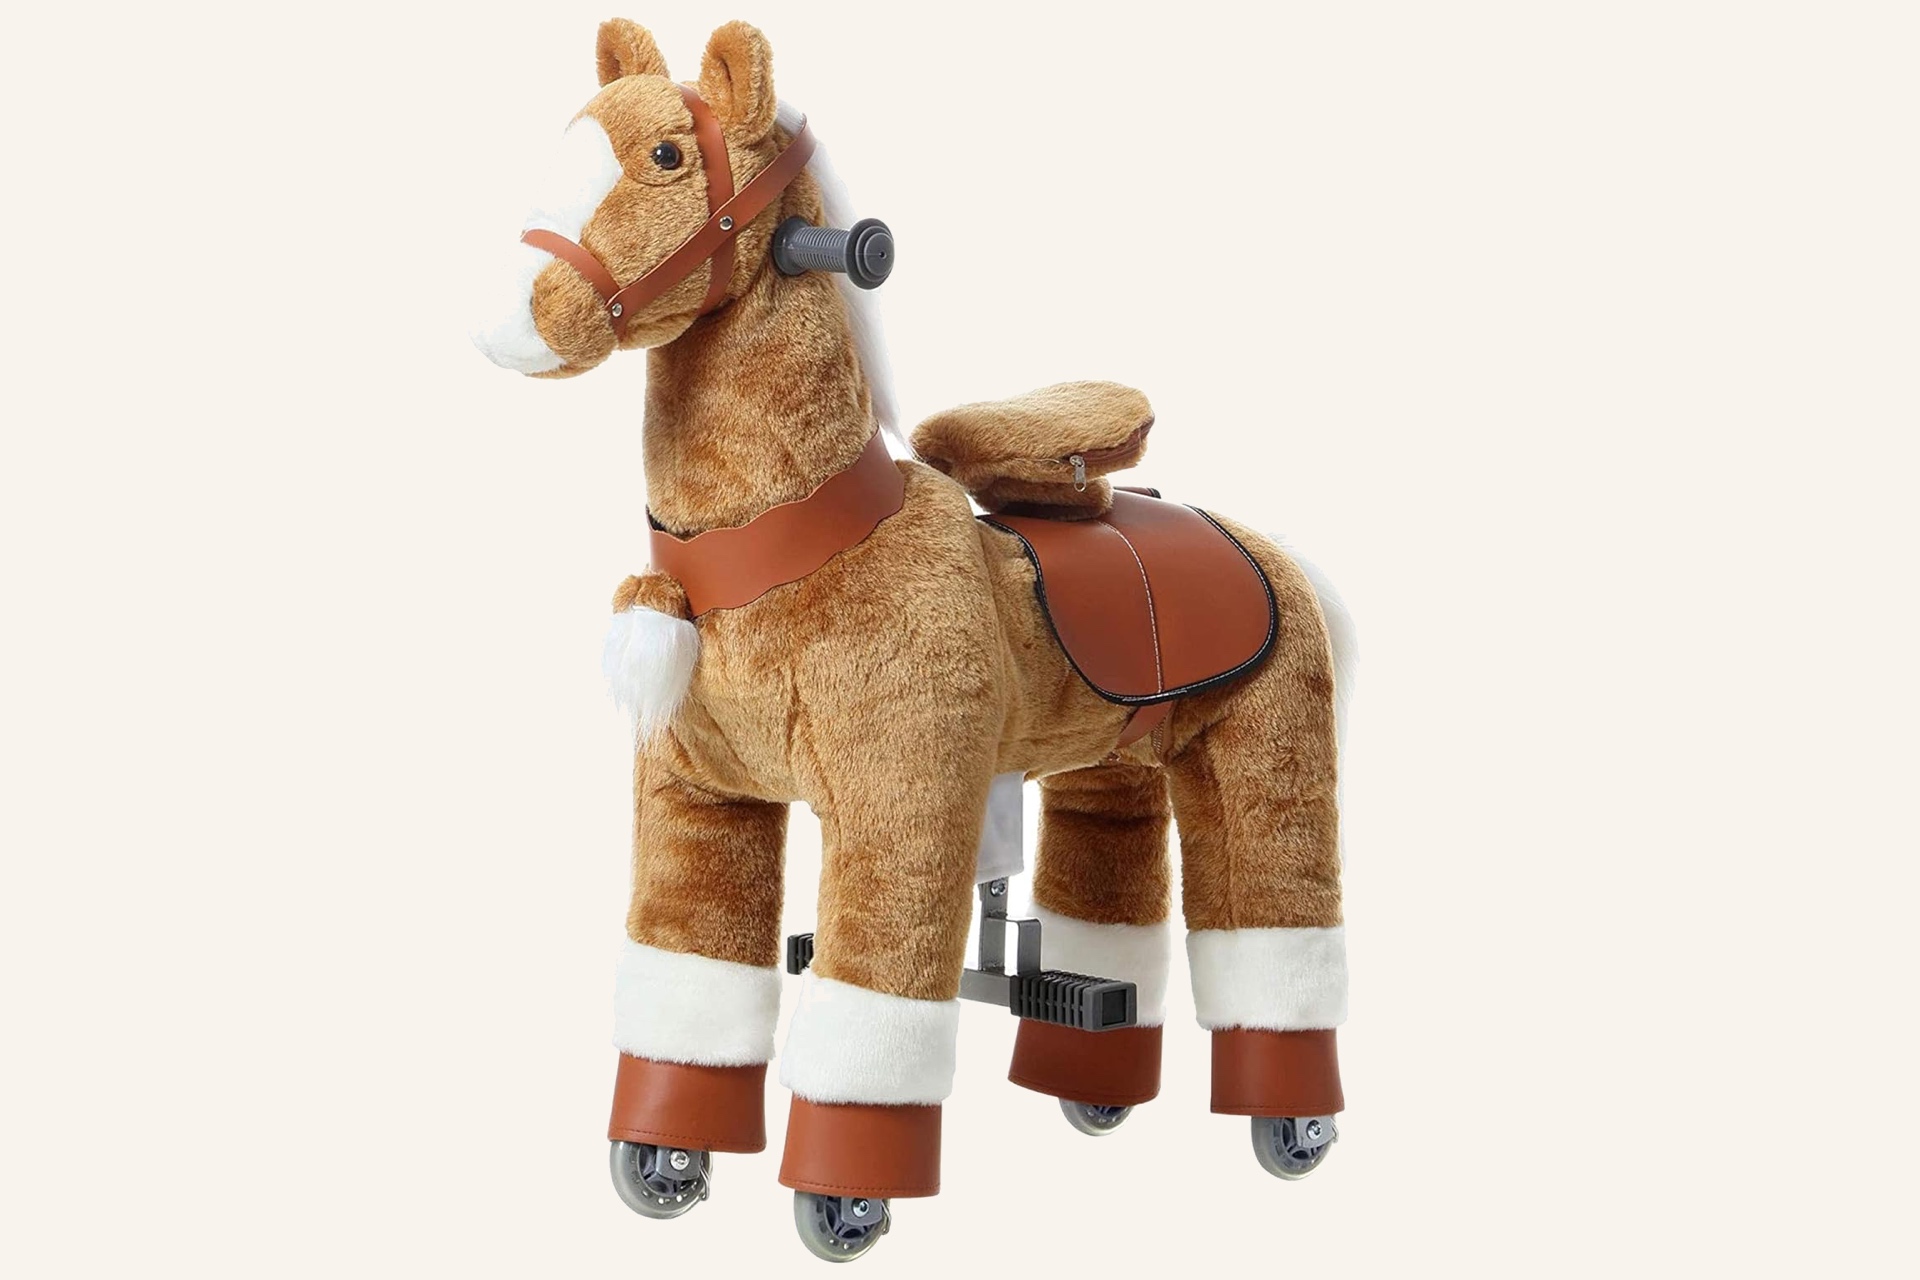 Plush toy horse on wheels for children to ride